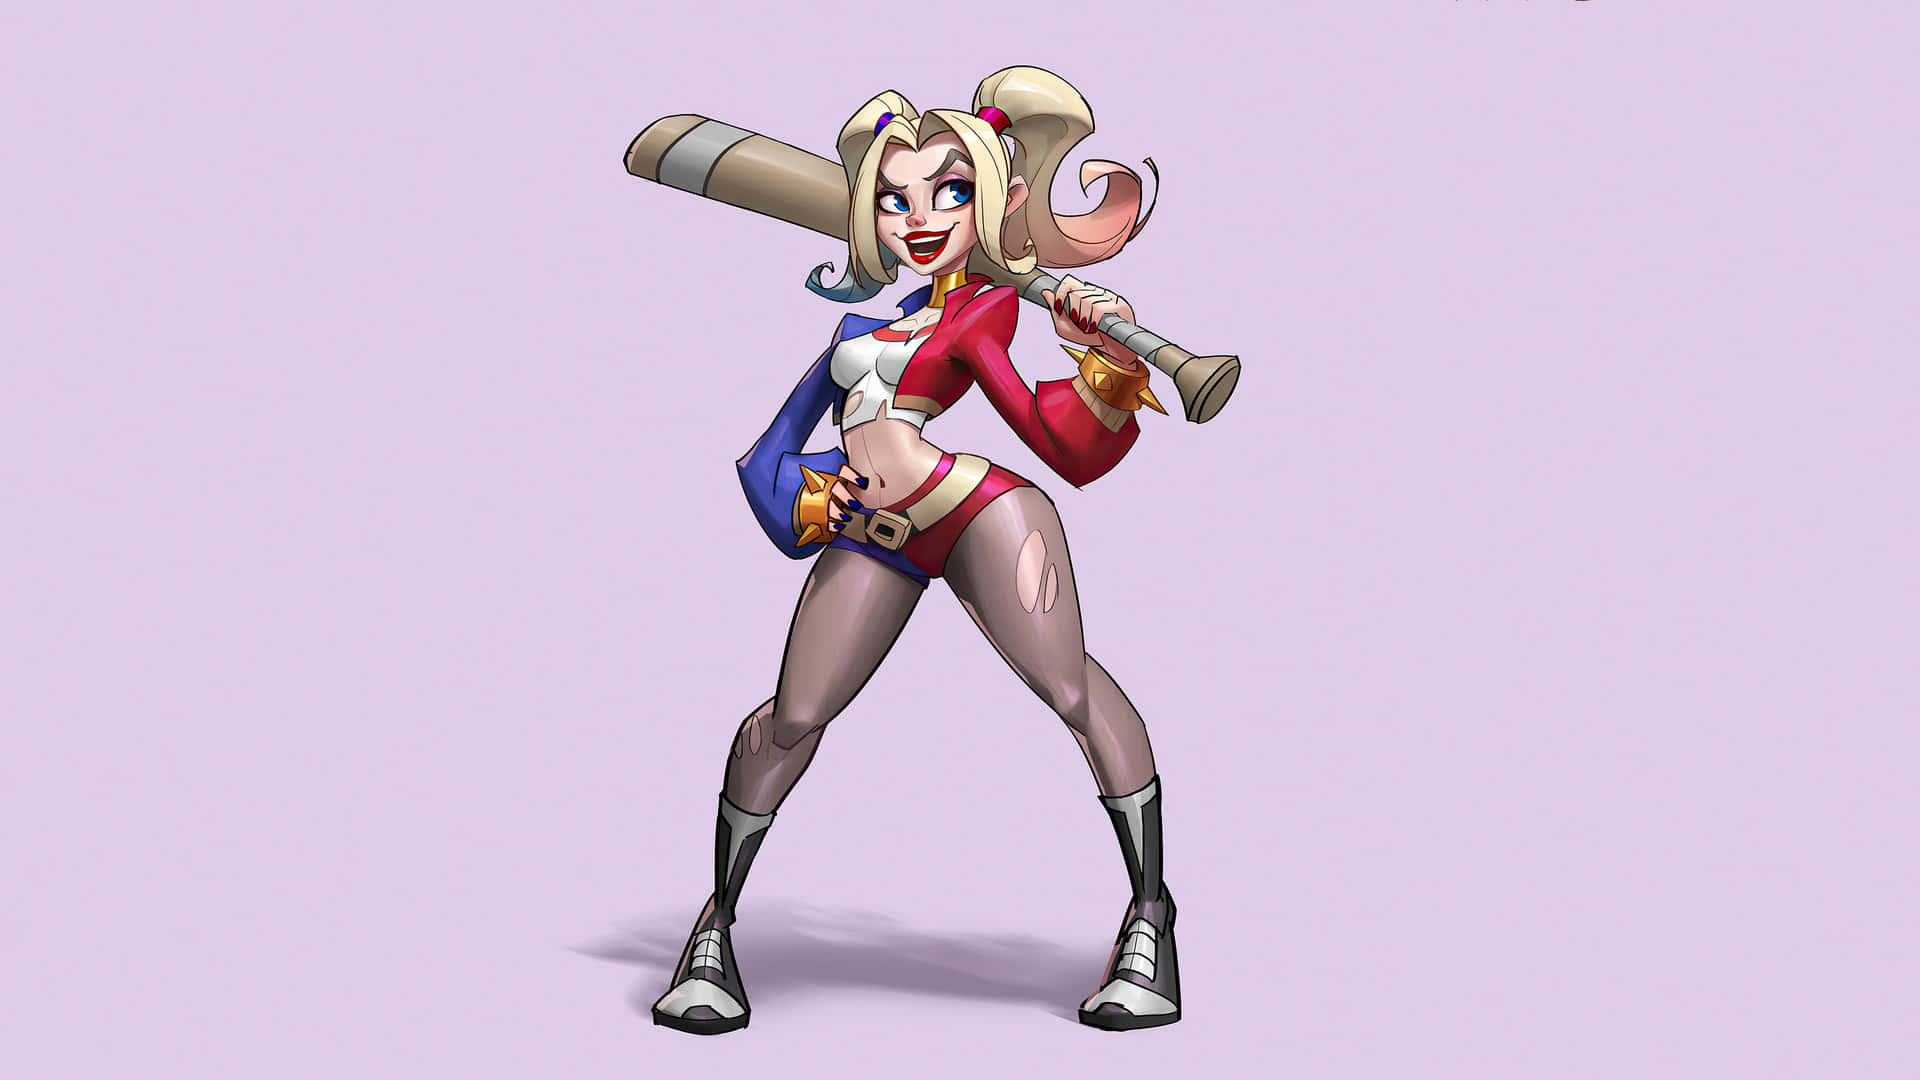 Harley Quinn with her signature baseball bat in action Wallpaper